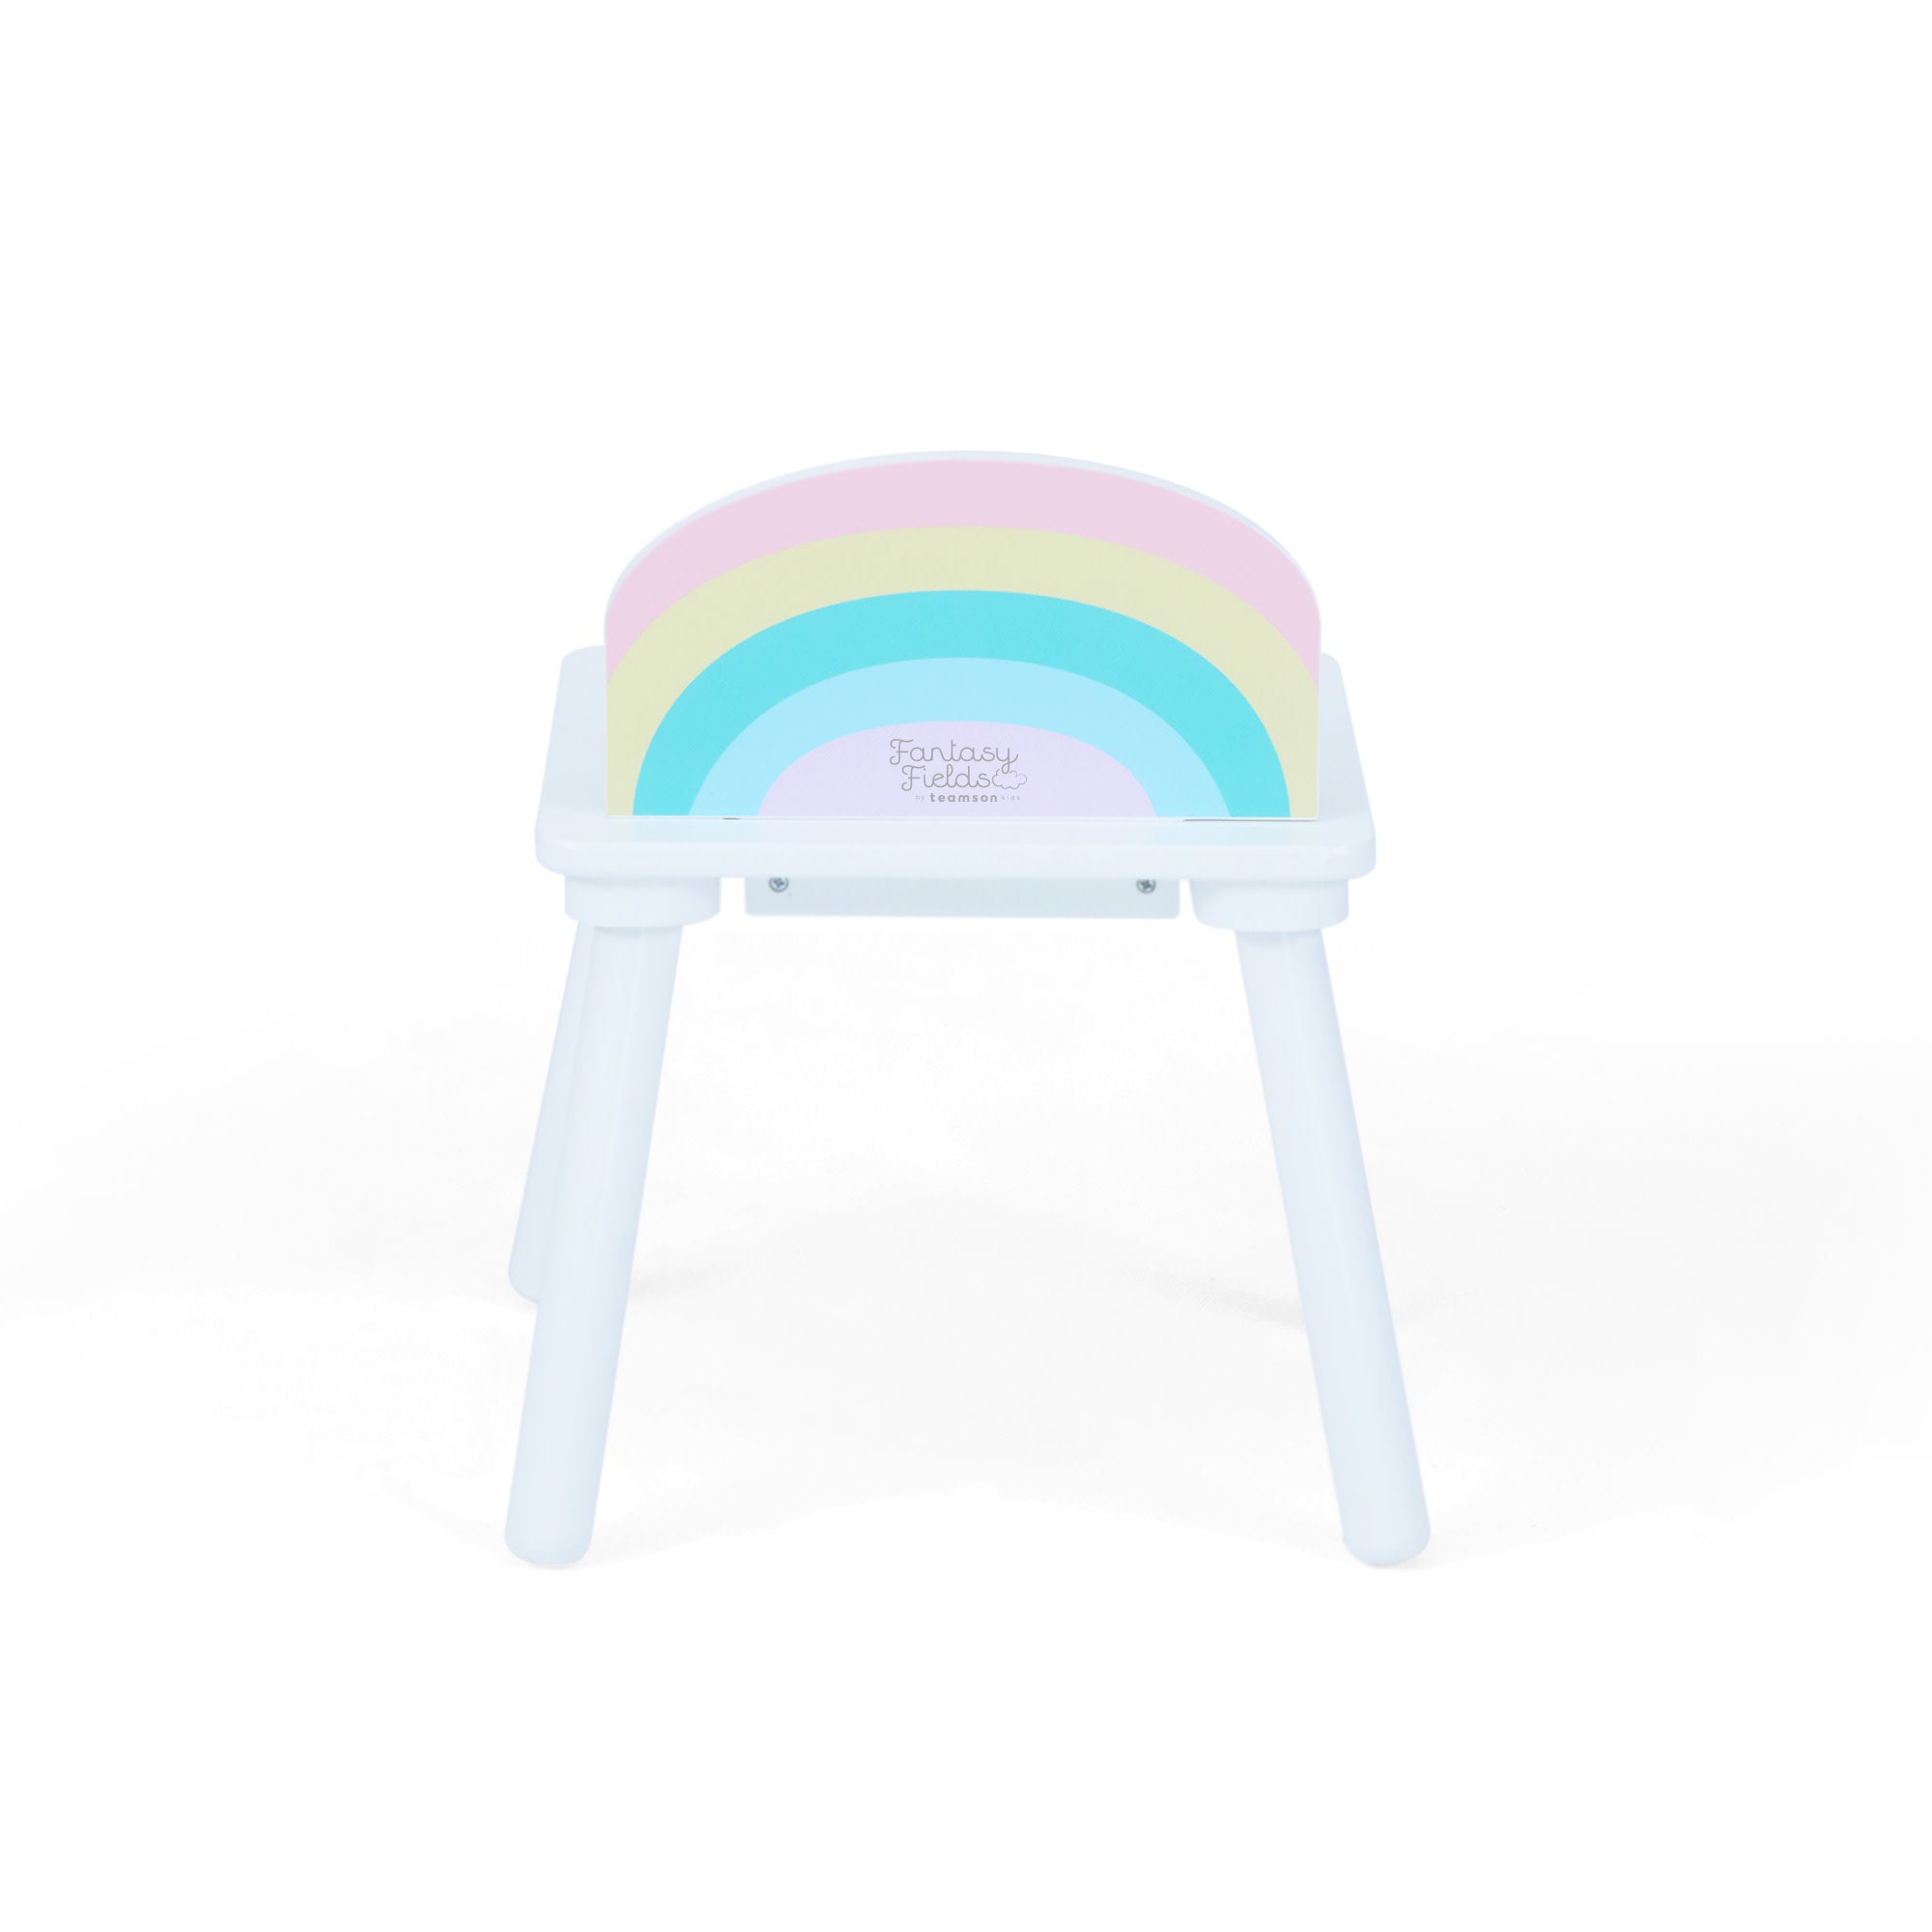 Fantasy Fields Kids Round Play Table with Center Mesh Storage and Two Rainbow Chairs, White